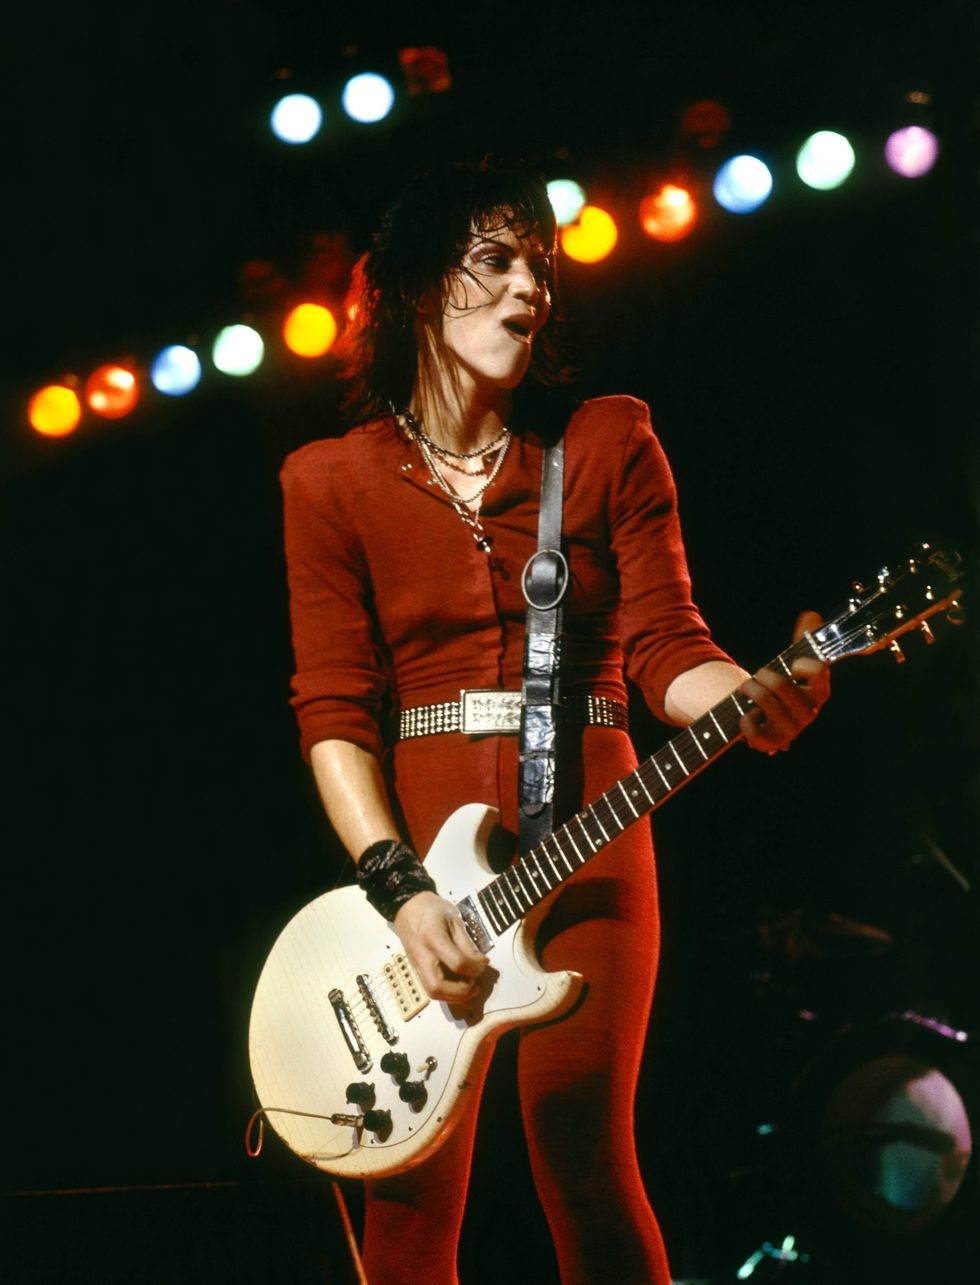 Rock of Ages Artists: Rock Respect: Joan Jett and the Blackhearts payed tribute to rock 'n roll music in 1981, with 'I Love Rock 'N Roll.' Originally recorded by the London-based band Arrows, Jett's soulful vocals and sexual undertones made the song famous. (Photo: Redferns)